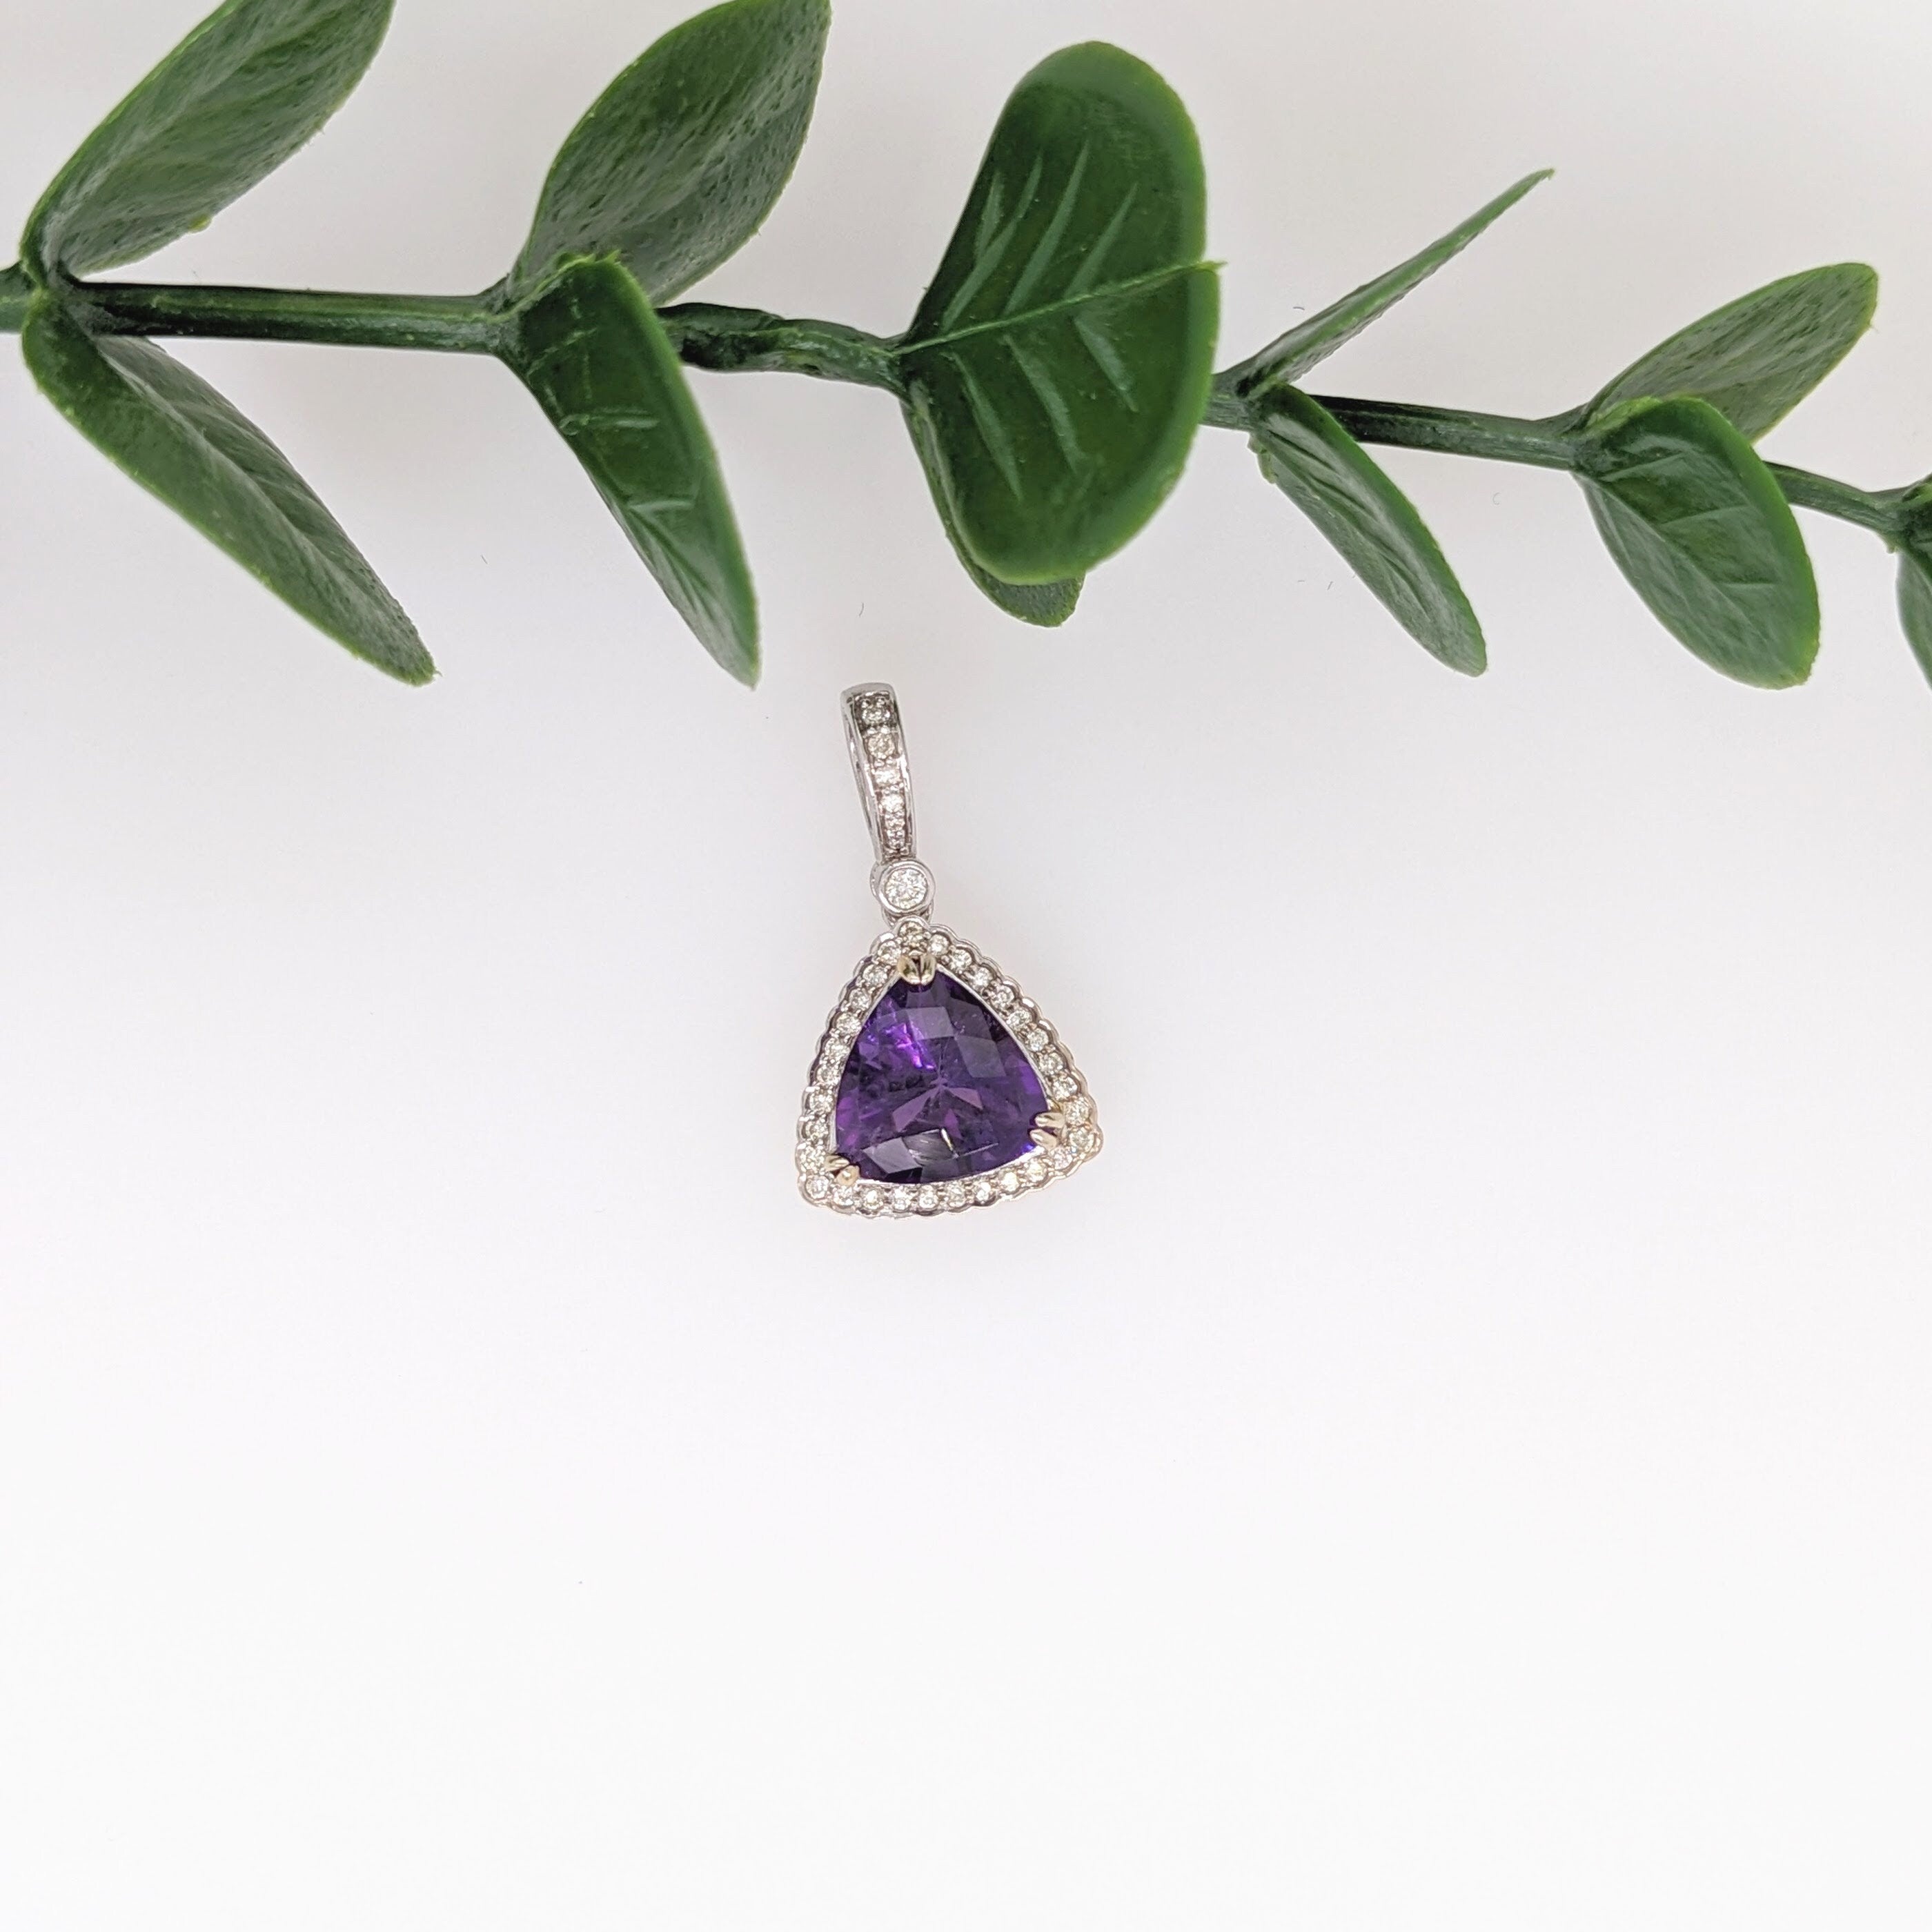 Pendants-Classy Purple Amethyst Pendant in Solid 14k White Gold with Natural Diamond Accents | Trillion 9mm | Diamond Bail | Gold Chain Option - NNJGemstones